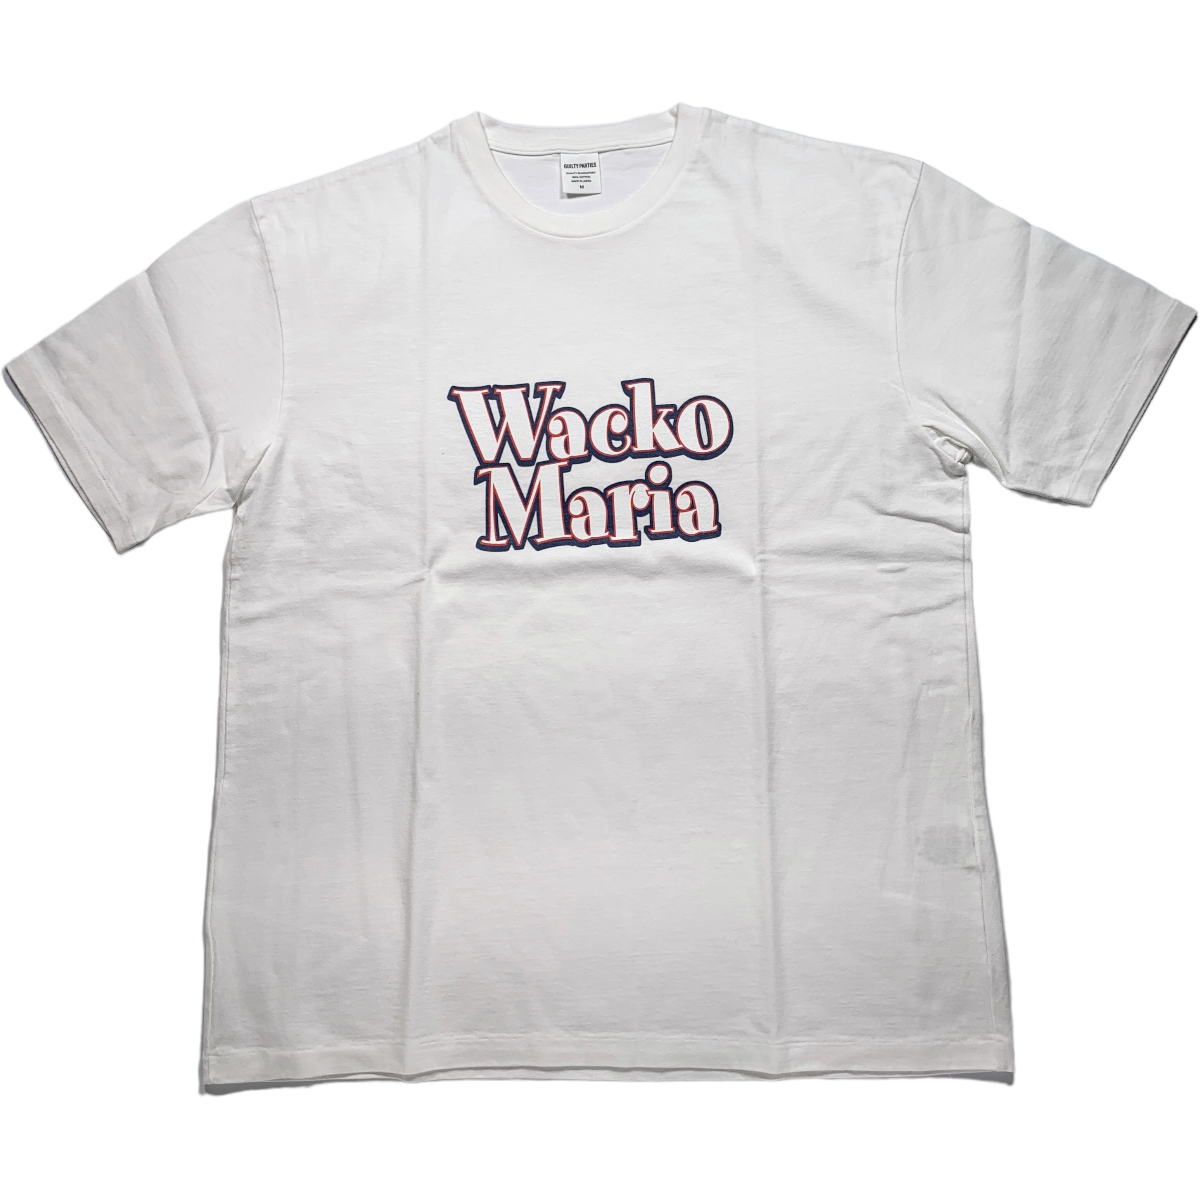 WACKOMARIA《ワコマリア》WASHED HEAVY WEIGHT CREW NECK  T-SHIRT(TYPE-2)(23SS-WMT-WT02) - BlackSheep【ブラックシープ】Official Online Store